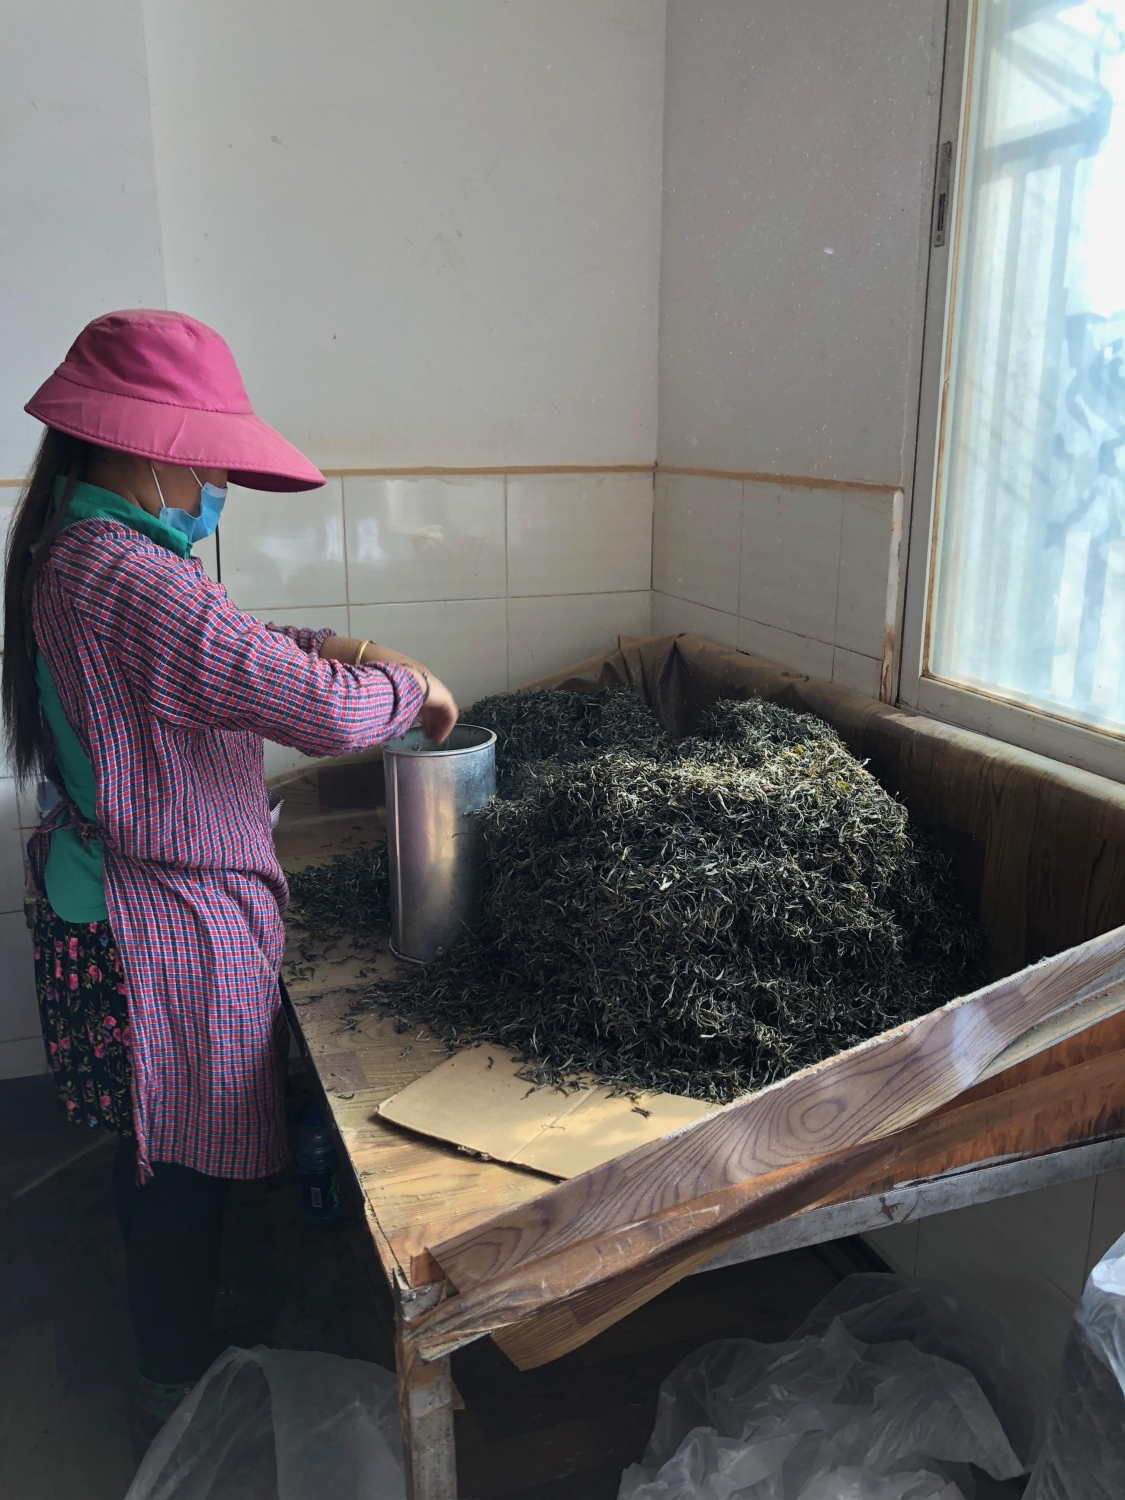 Yiwu Pu'er Tea Factory worker filling cylinders with mao cha to be steamed and shaped